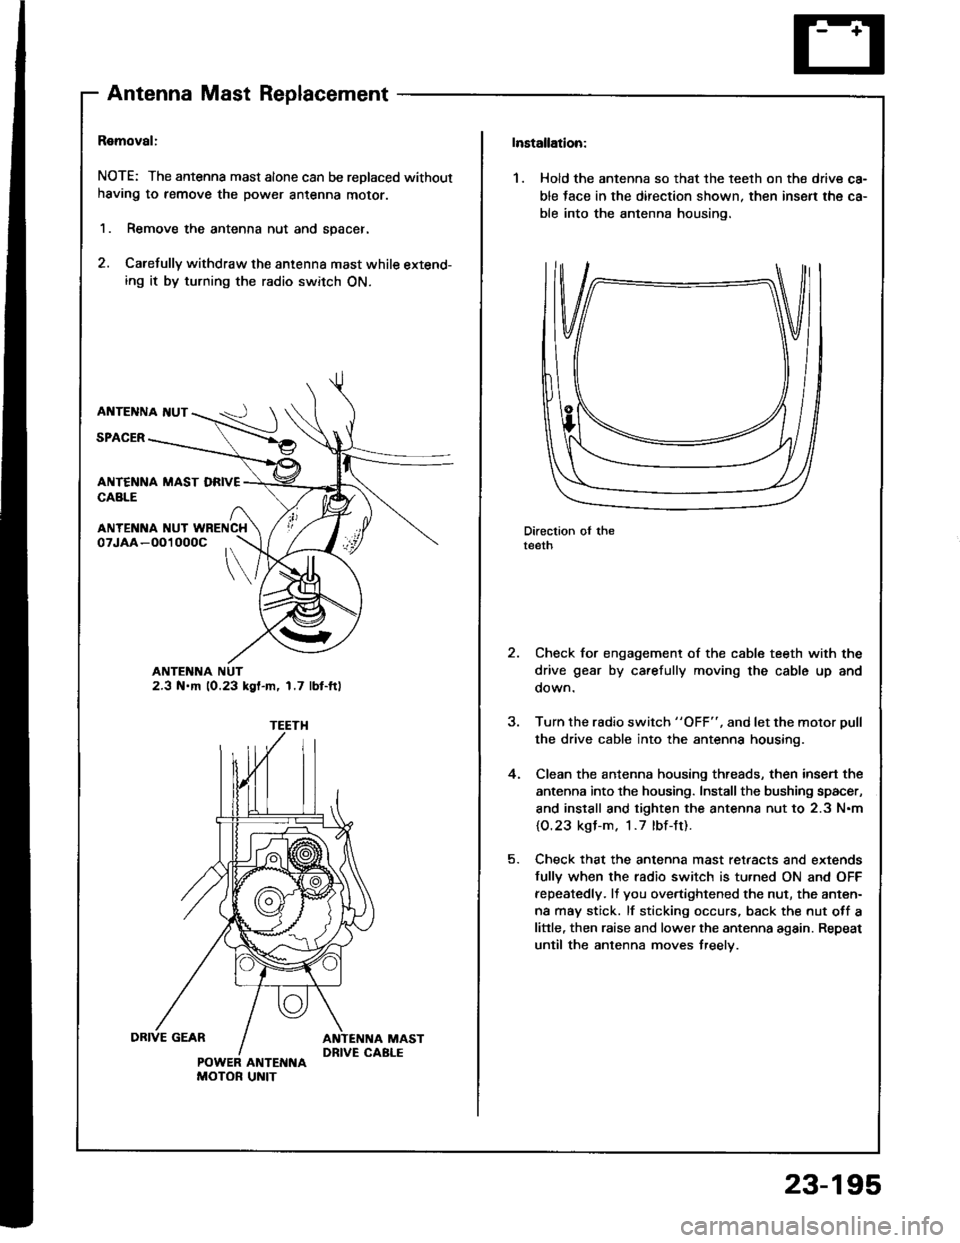 HONDA INTEGRA 1994 4.G Workshop Manual AntennaMastReplacement
Ramoval:
NOTE: The antenna mast alone can be replaced without
having to remove the power antenna moror.
1. Remove the antenna nut and spacer.
2. Carefully withdraw the antenna m